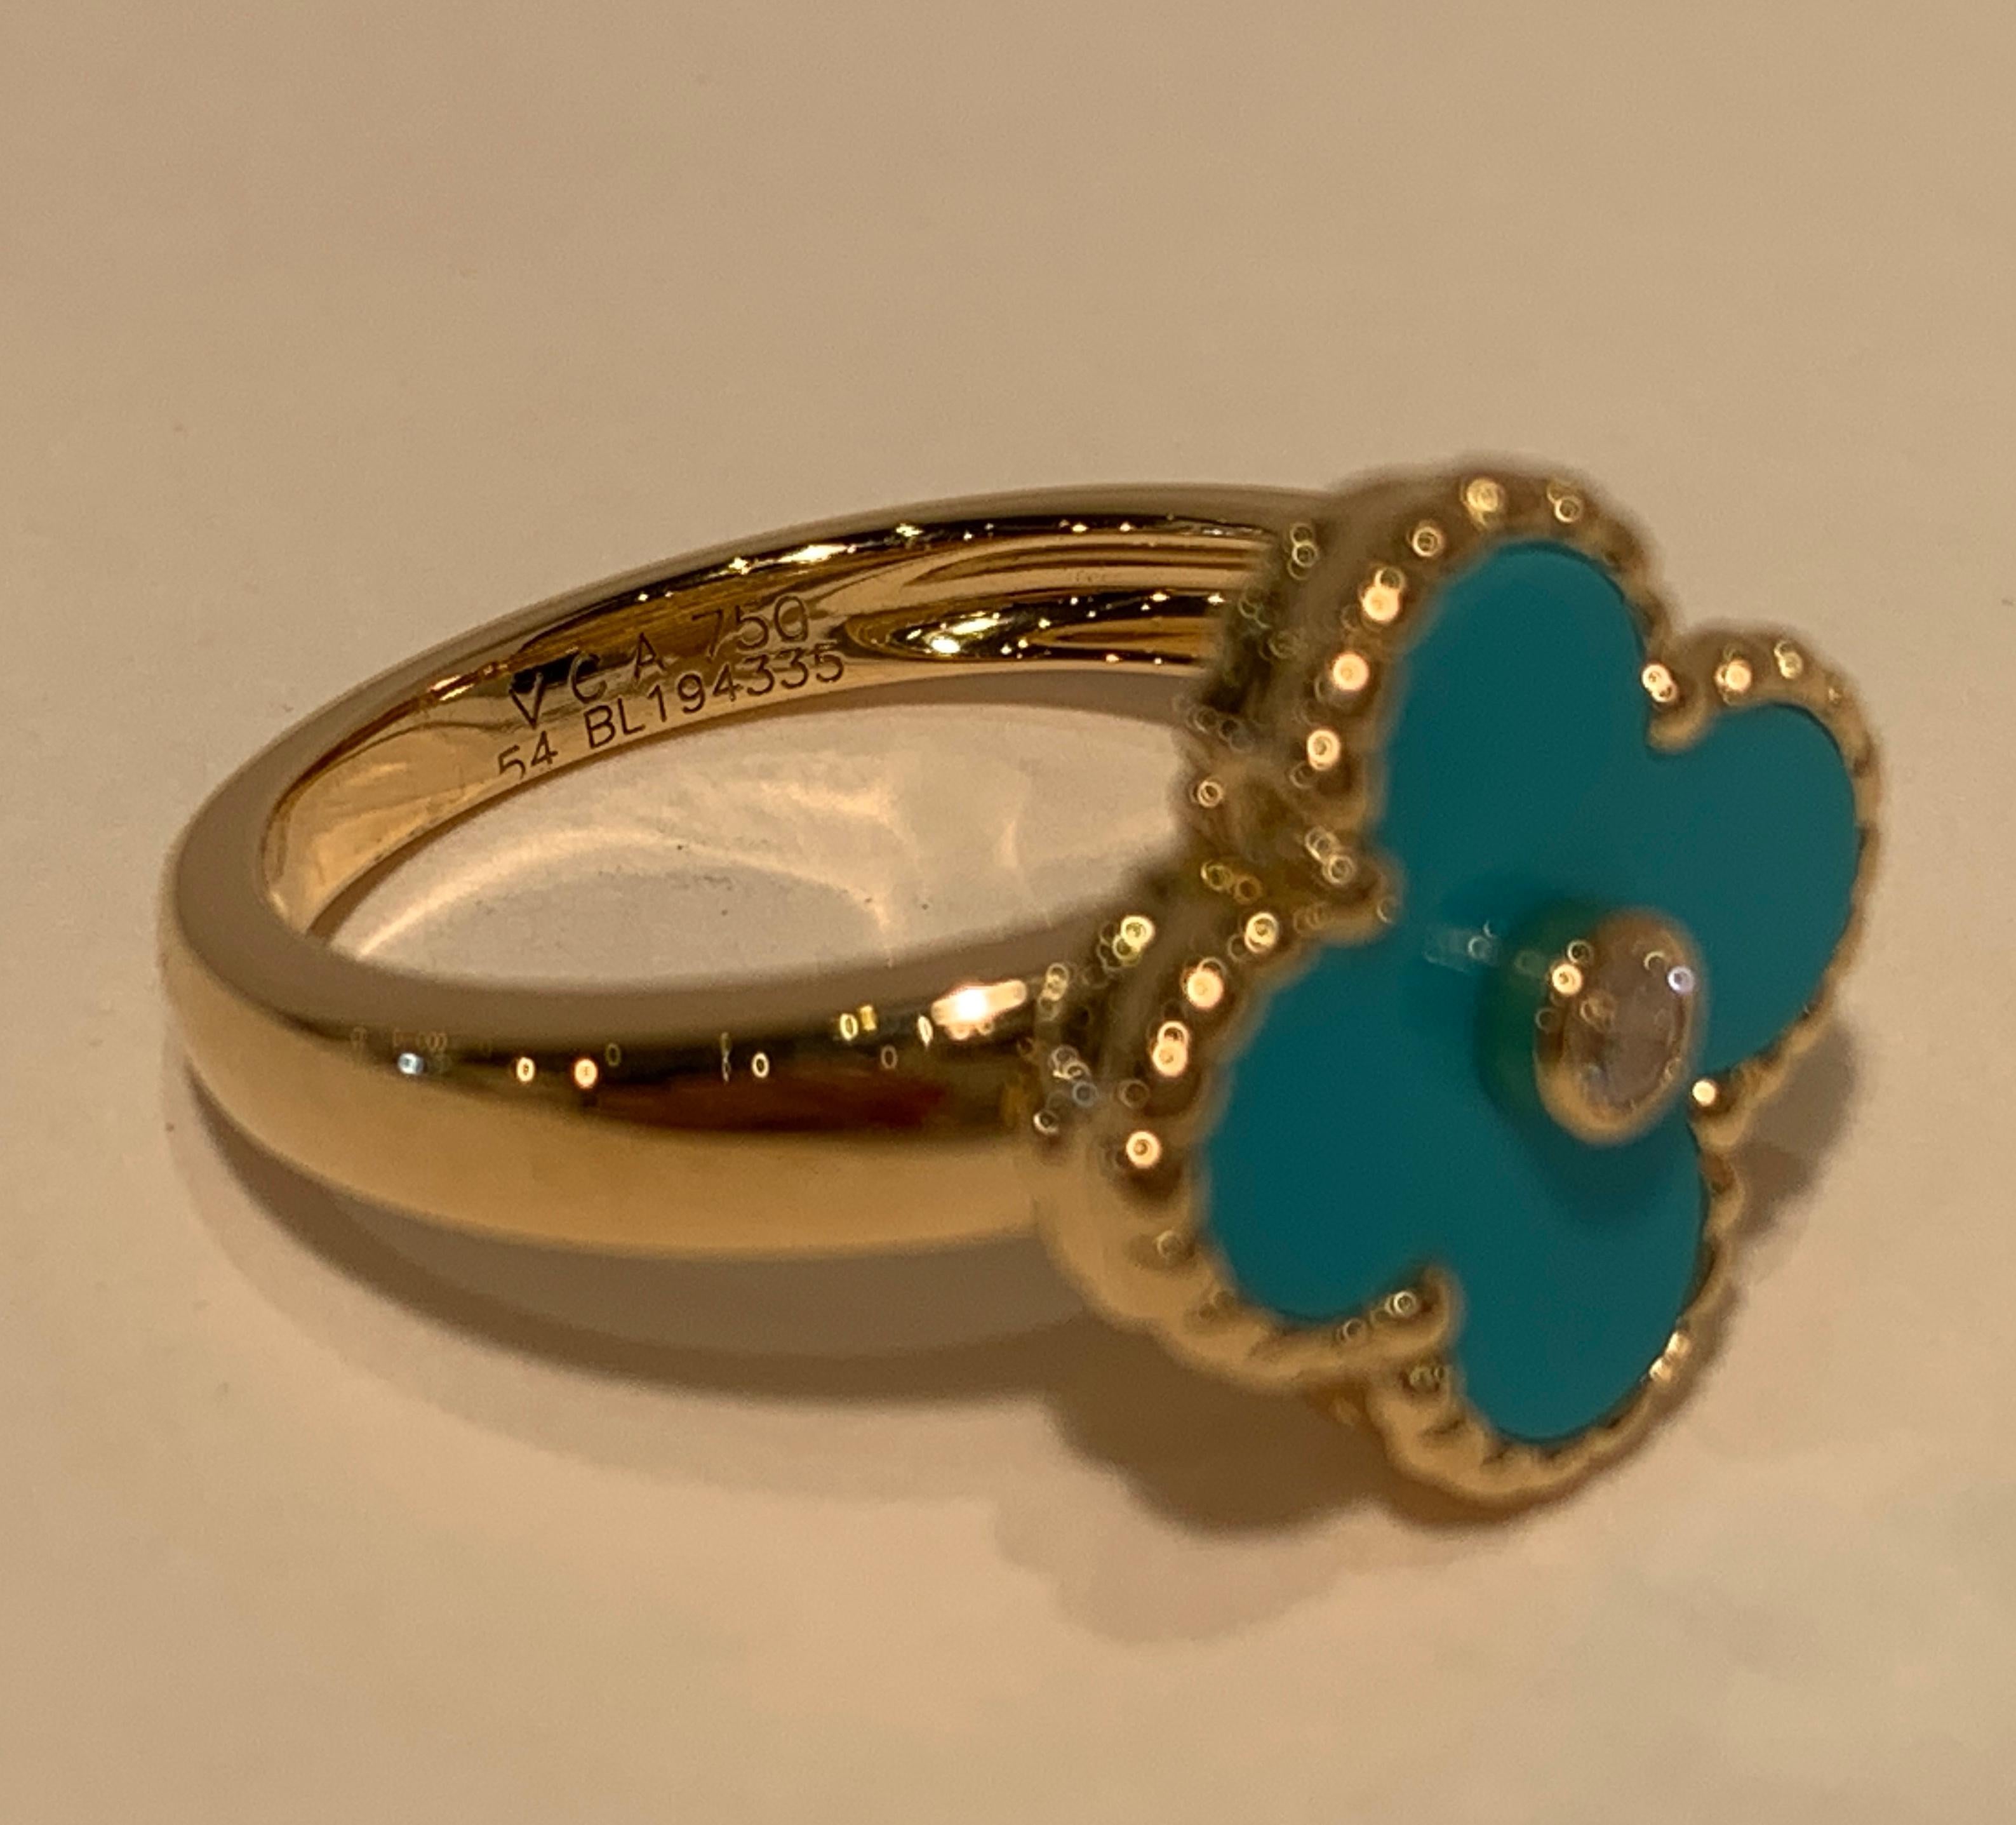 Exquisite authentic Van Cleef & Arpels 18 karat yellow gold ring of unparalleled artistry features a bright blue turquoise 4 leaf clover shaped face with a bezel set round brilliant diamond center stone. The turquoise is bezel set with beaded trim